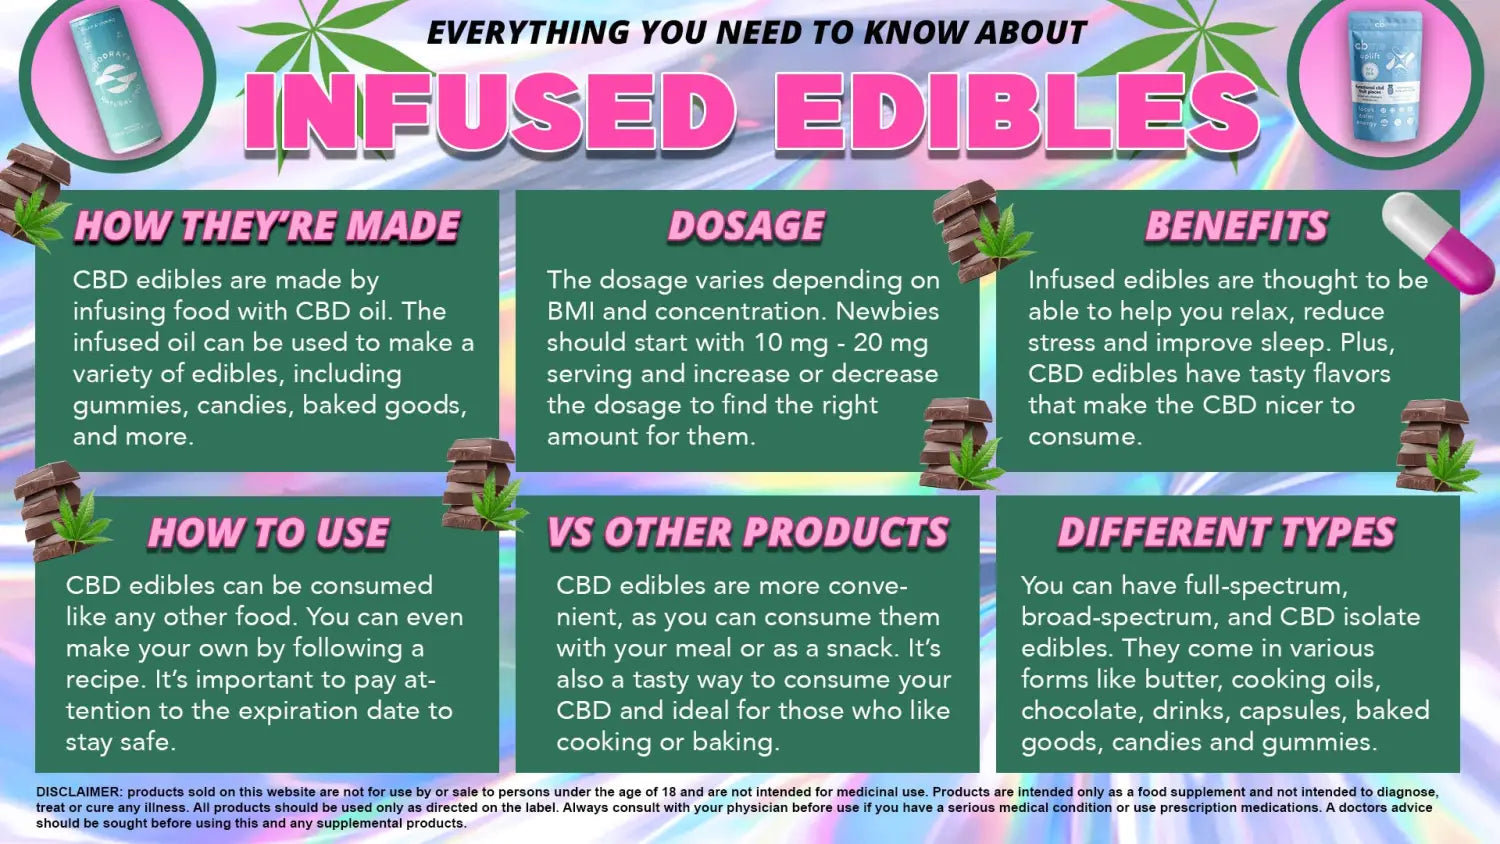 CBD-INFUSED EDIBLES UK SHOPPING GUIDE